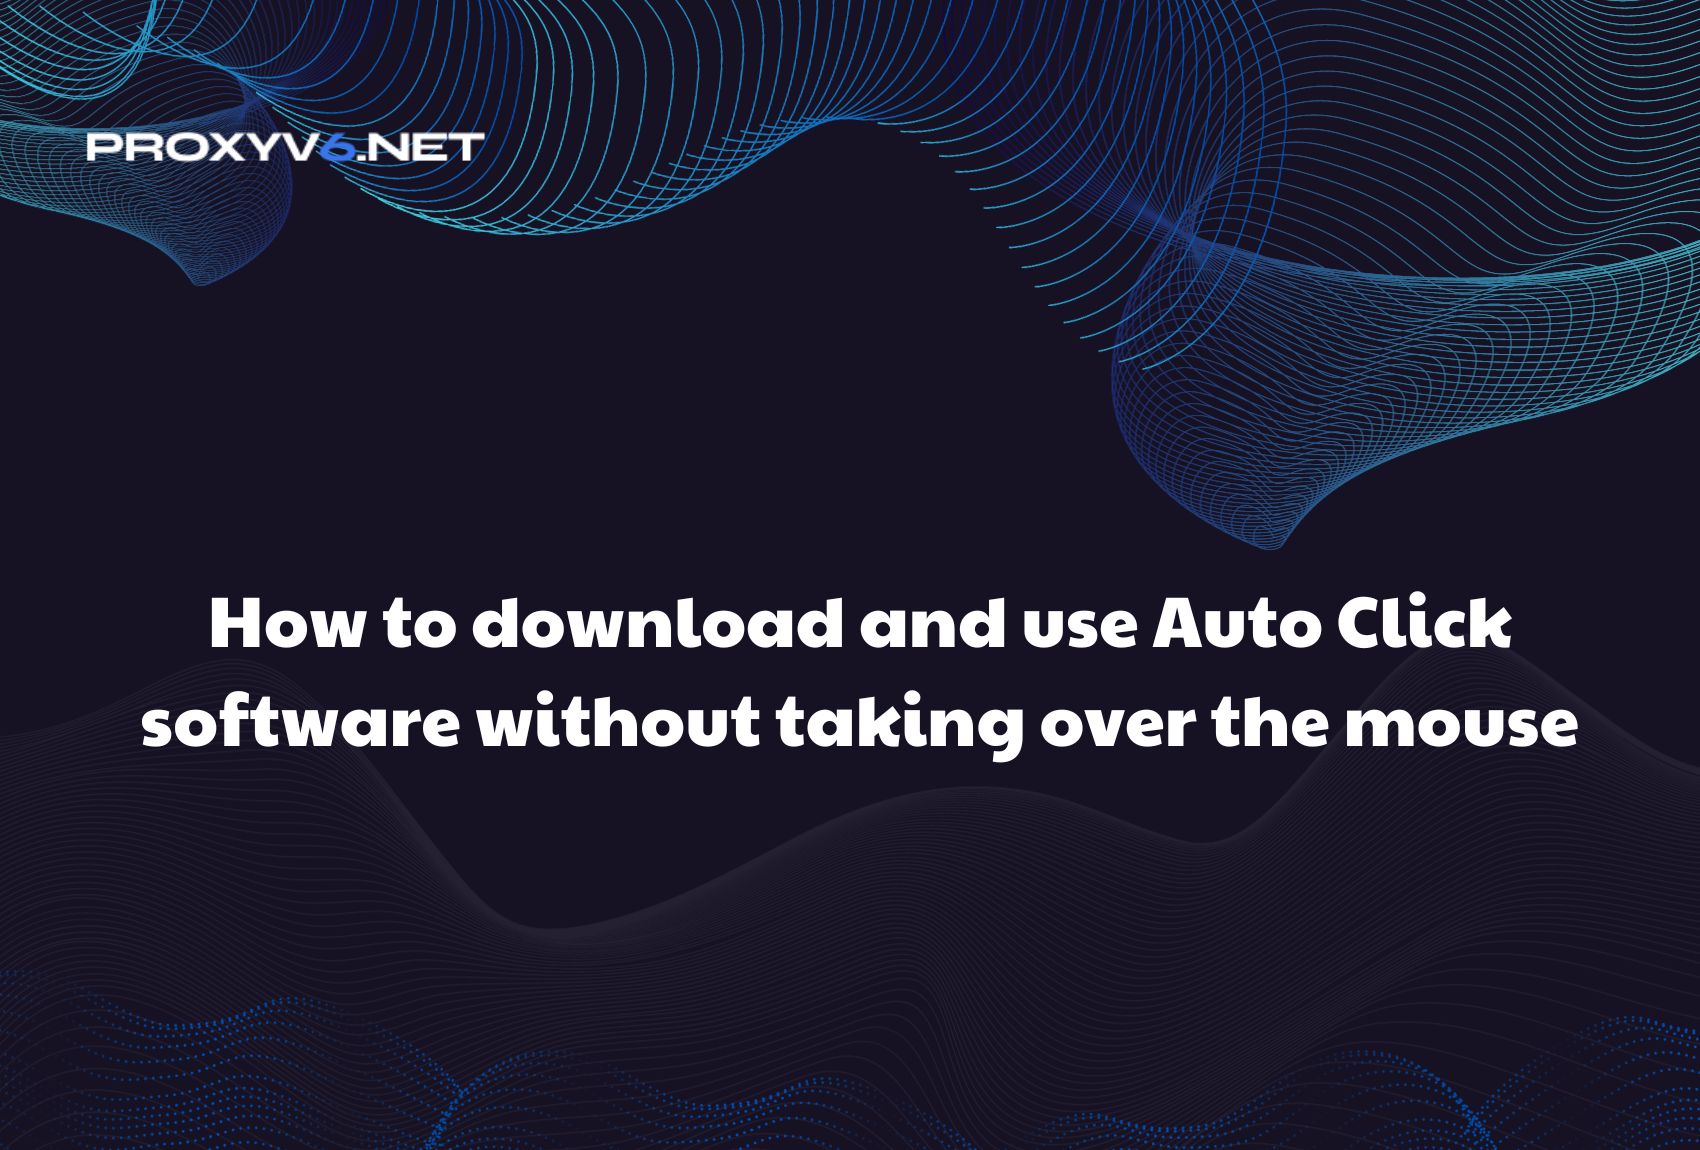 How to download and use Auto Click software without taking over the mouse